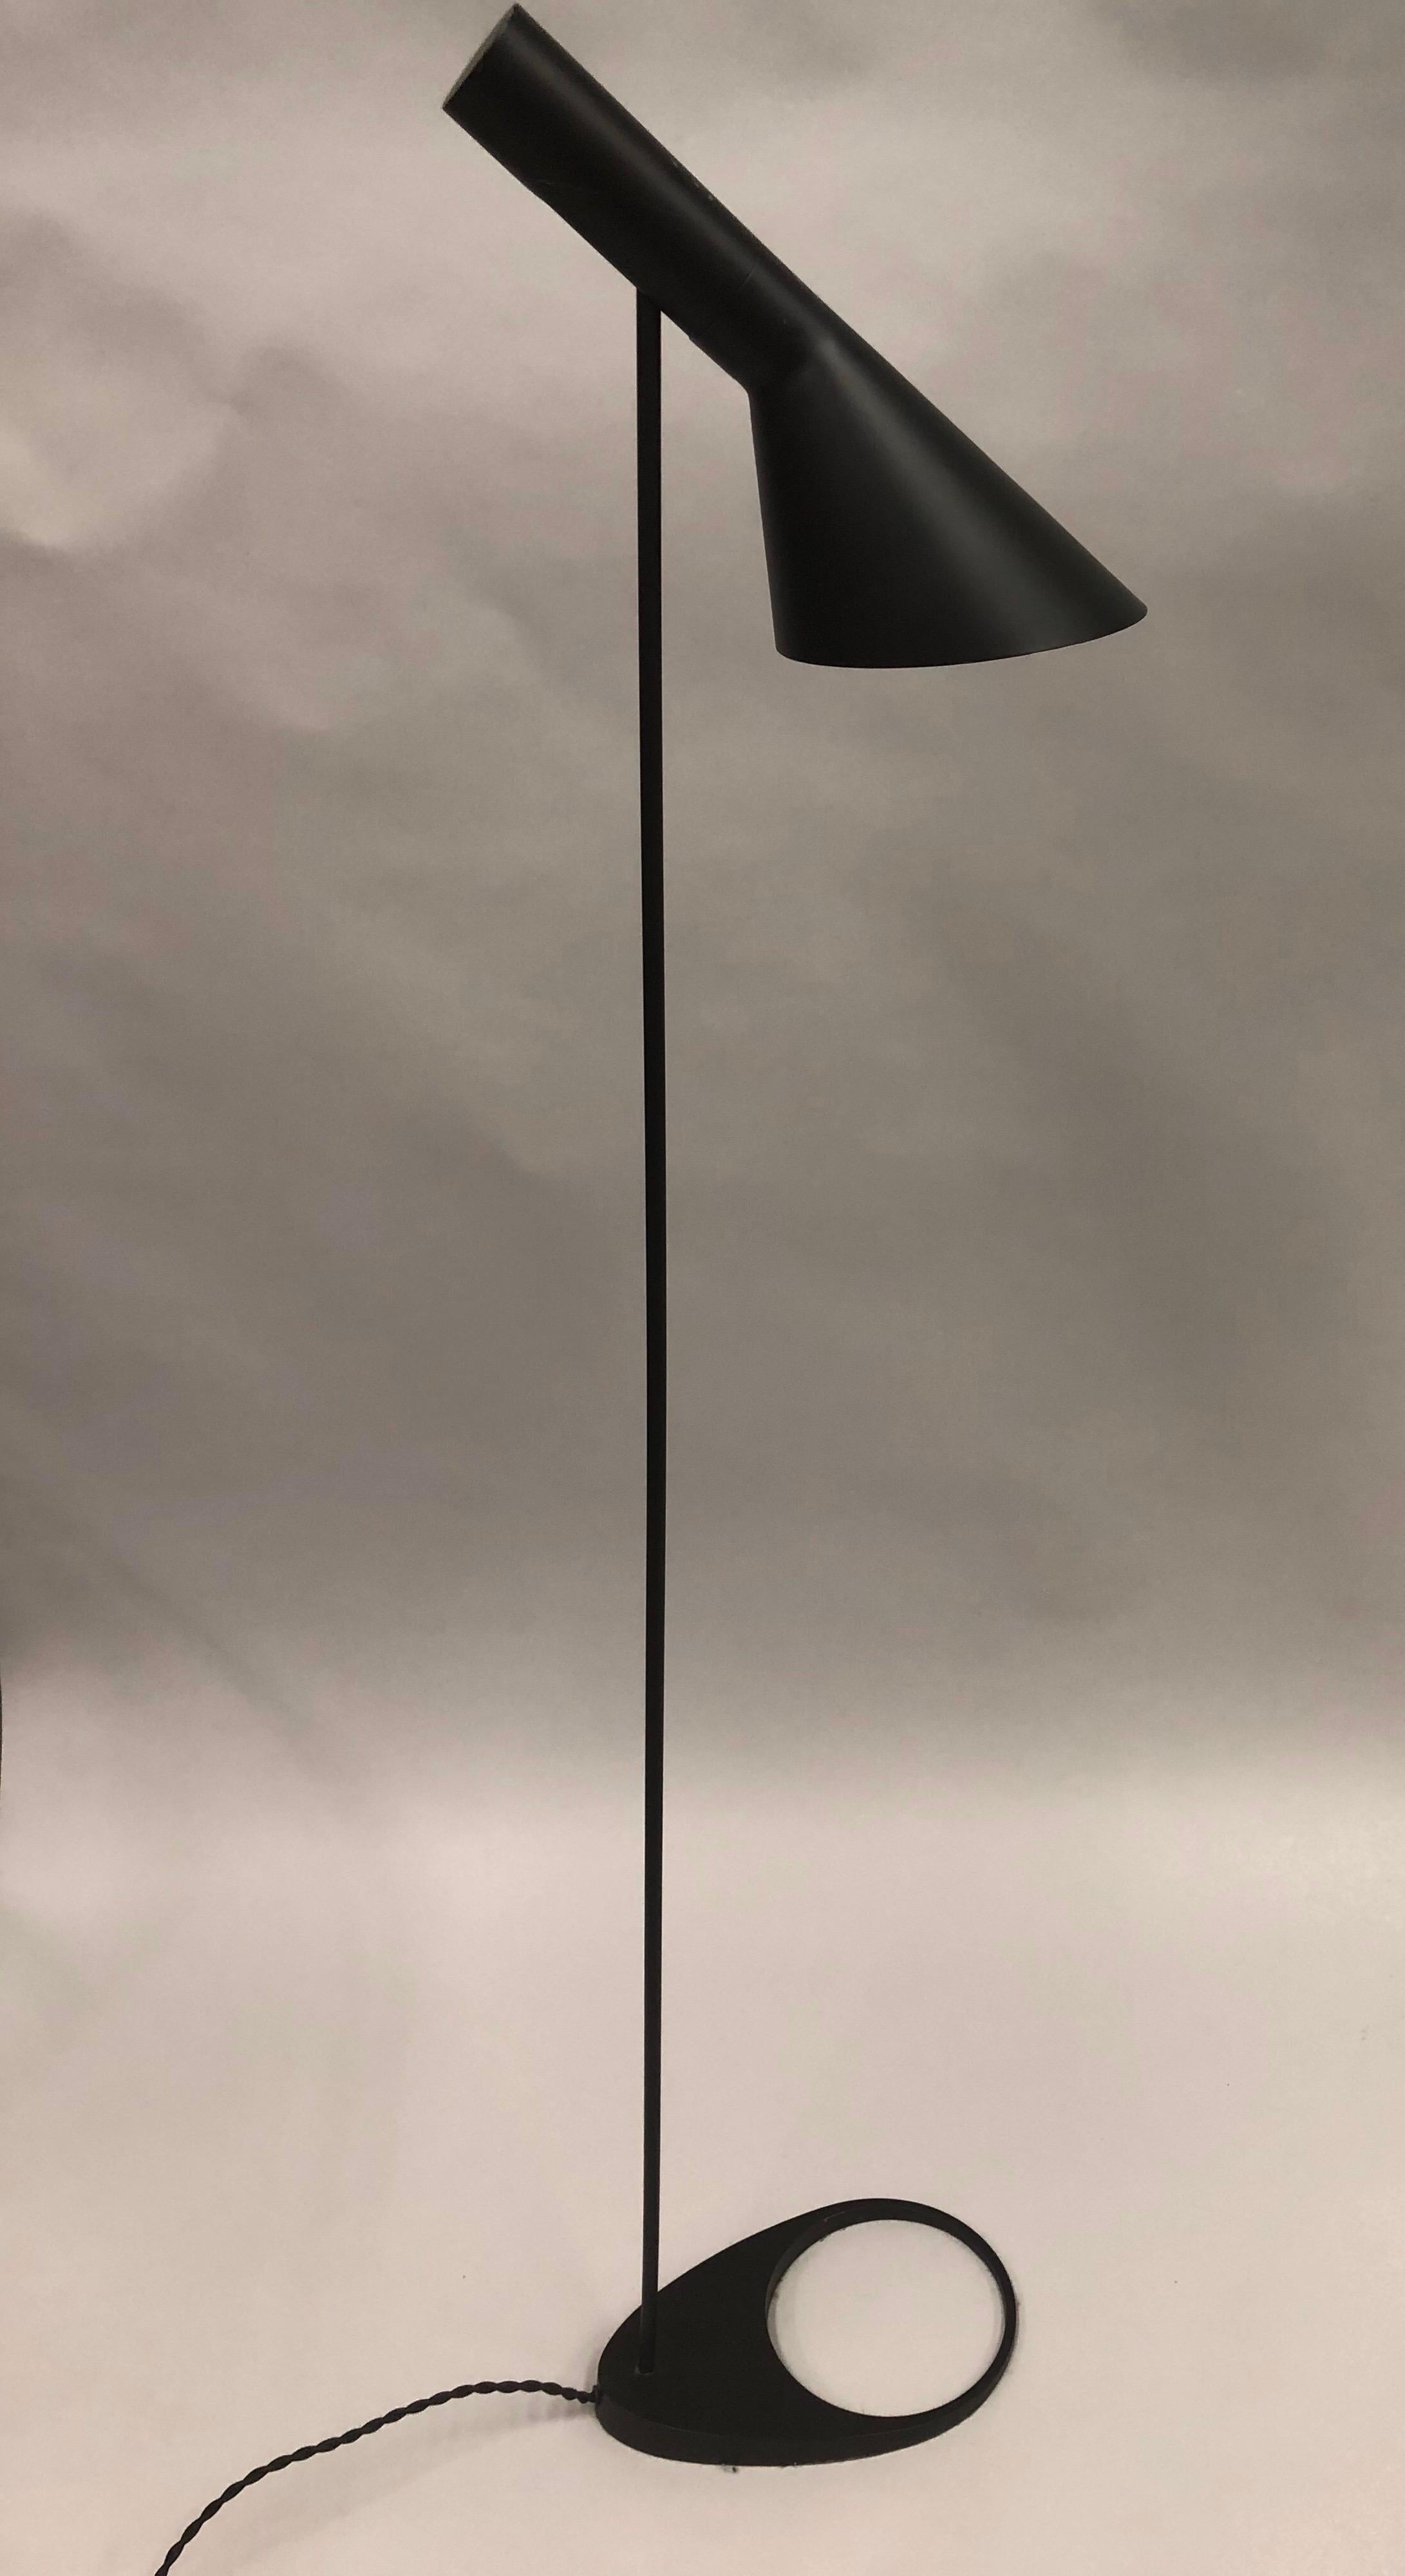 Vintage Scandinavian (Danish) Mid-Century Modern floor lamp by Arne Jacobsen for Louis Poulsen. This piece was originally designed by Jacobsen for the SAS Royal Hotel in Copenhagen circa 1970 and has become a classic of modern design.

The piece